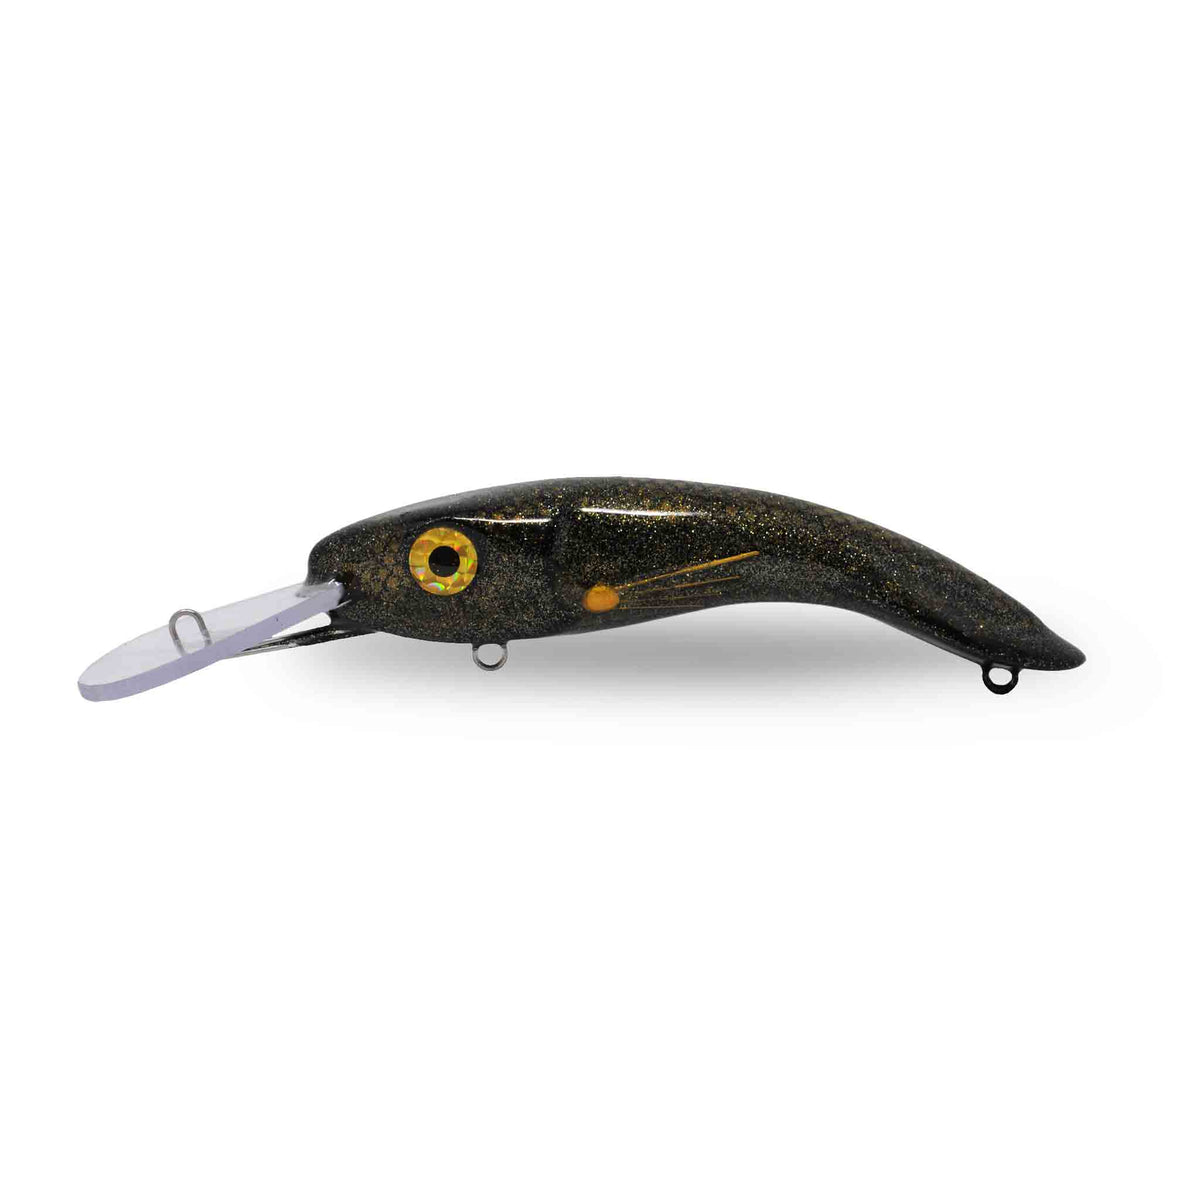 Resin Mold Fishing Lure -  Canada